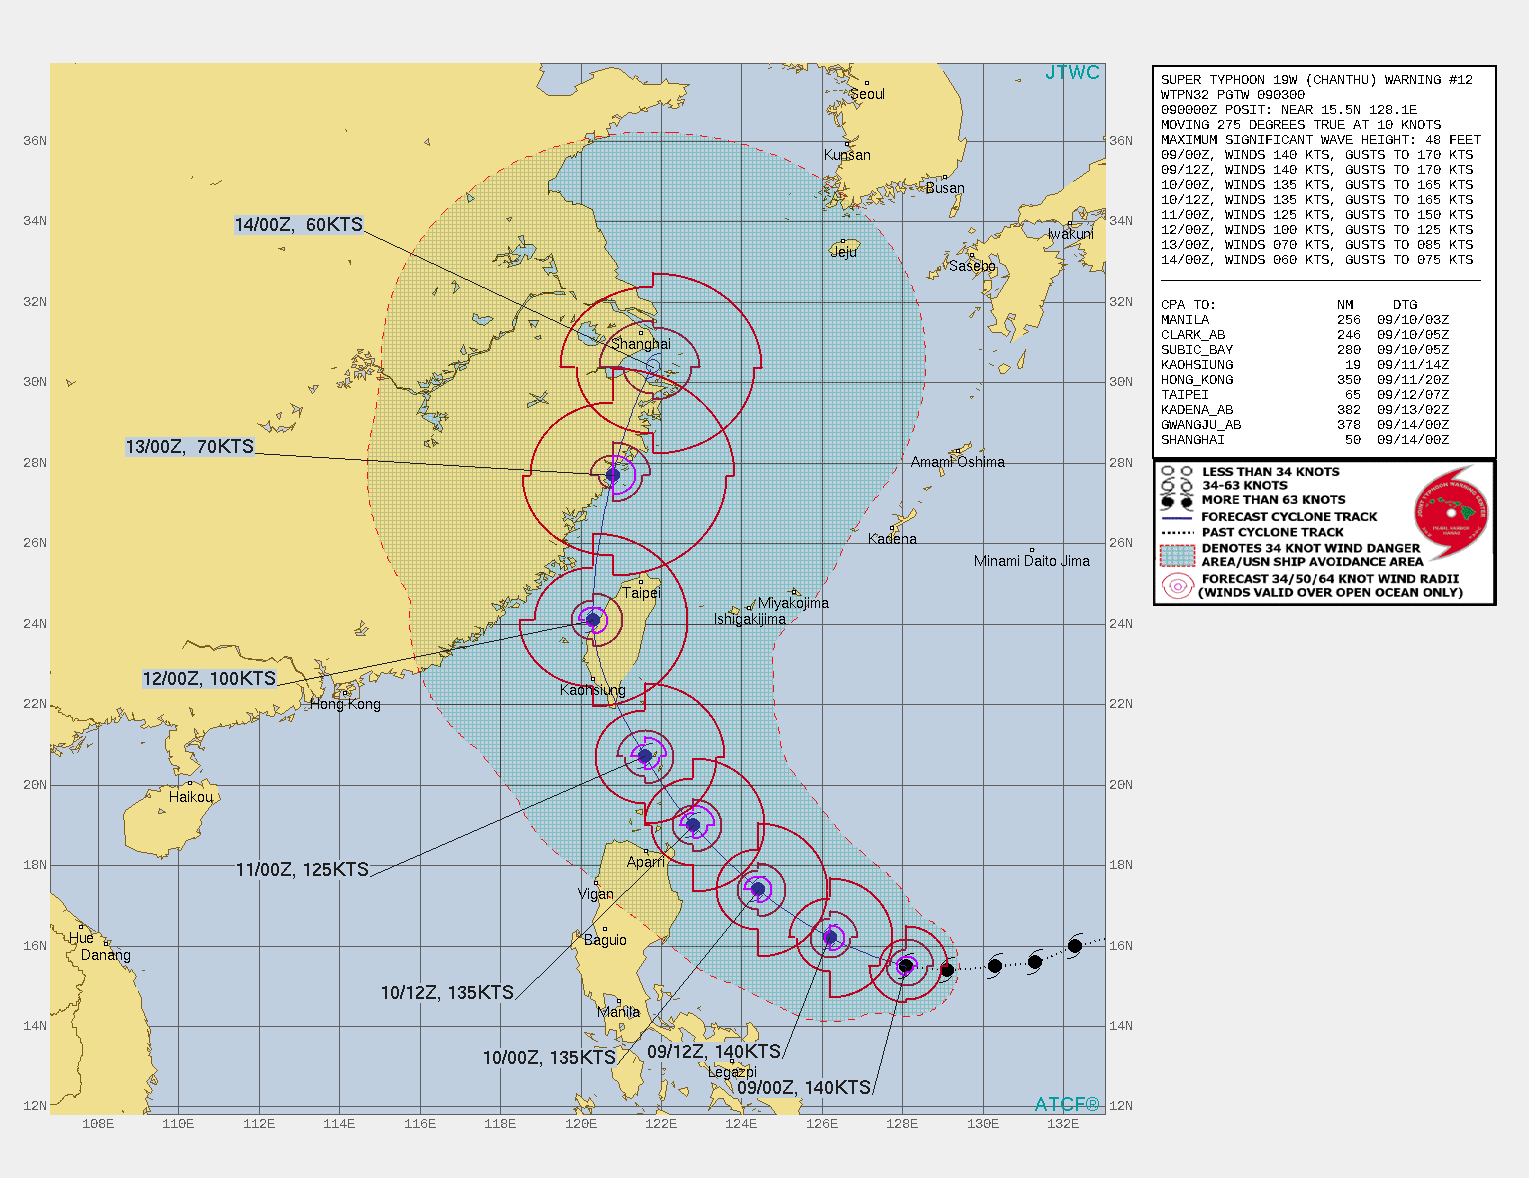 STY 19W(CHANTHU). WARNING 12 ISSUED AT 09/03UTC.SIGNIFICANT FORECAST CHANGES: THERE ARE NO SIGNIFICANT CHANGES TO THE FORECAST FROM THE PREVIOUS WARNING.  FORECAST DISCUSSION: STY CHANTU WILL COMMENCE ON A RECURVATURE TRACK PATTERN AS IT TURNS MORE WEST-NORTHWESTWARD THEN NORTHWESTWARD  AFTER 24H AS IT ROUNDS THE WESTERN EDGE OF THE SUBTROPICAL RIDGE(STR). AFTER 48H,  IT WILL CROSS TAIWAN AS IT TRACKS NORTHWARD AND CRESTS THE STR AXIS BY 72h. AFTERWARD, THE SYSTEM WILL TURN MORE NORTH- NORTHEASTWARD ON THE POLEWARD SIDE OF THE STR, BRUSH THE CHINESE  COAST AND BY 120H WILL BE JUST SOUTH OF SHANGHAI. THE FAVORABLE  ENVIRONMENT WILL SUSTAIN THE CURRENT INTENSITY UP TO 12H;  AFTERWARD, SLOWLY INCREASING VERTICAL WIND SHEAR(VWS) ASSOCIATED UPPER LEVEL CROSS WINDS AND SOME LAND INTERACTION AS IT CLIPS THE NORTHEASTERN TIP OF LUZON, WILL SLOWLY WEAKEN THE SYSTEM TO 125KNOTS/CAT 4 BY 48H AS IT CROSSES THE LUZON STRAIT. AFTER 48H, A MORE DRASTIC EROSION WILL OCCUR AS THE CYCLONE DRAGS ACROSS TAIWAN AND INTO HIGHER VWS, DOWN TO 100KNOTS/CAT 3 AS IT EXITS INTO THE TAIWAN STRAIT AROUND 72H. FURTHER LAND INTERACTION, THIS TIME WITH THE CHINESE COAST, WILL FURTHER WEAKEN THE SYSTEM MORE RAPIDLY DOWN TO 60KNOTS BY 120H AS IT APPROACHES SHANGHAI.